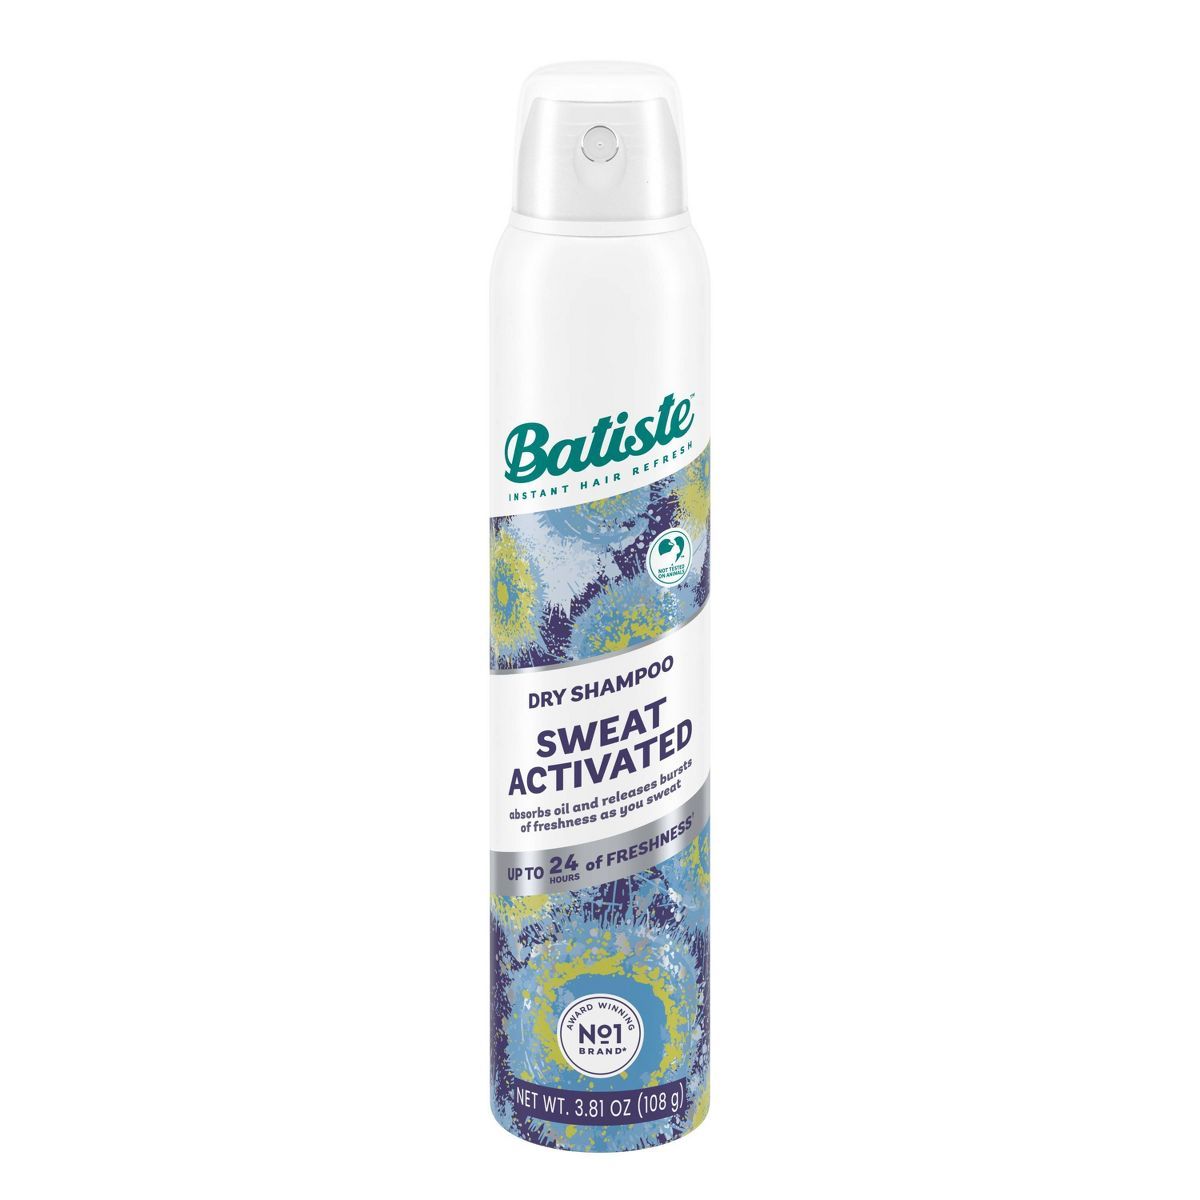 Batiste Sweat Activated Dry Shampoo - 3.81oz | Target